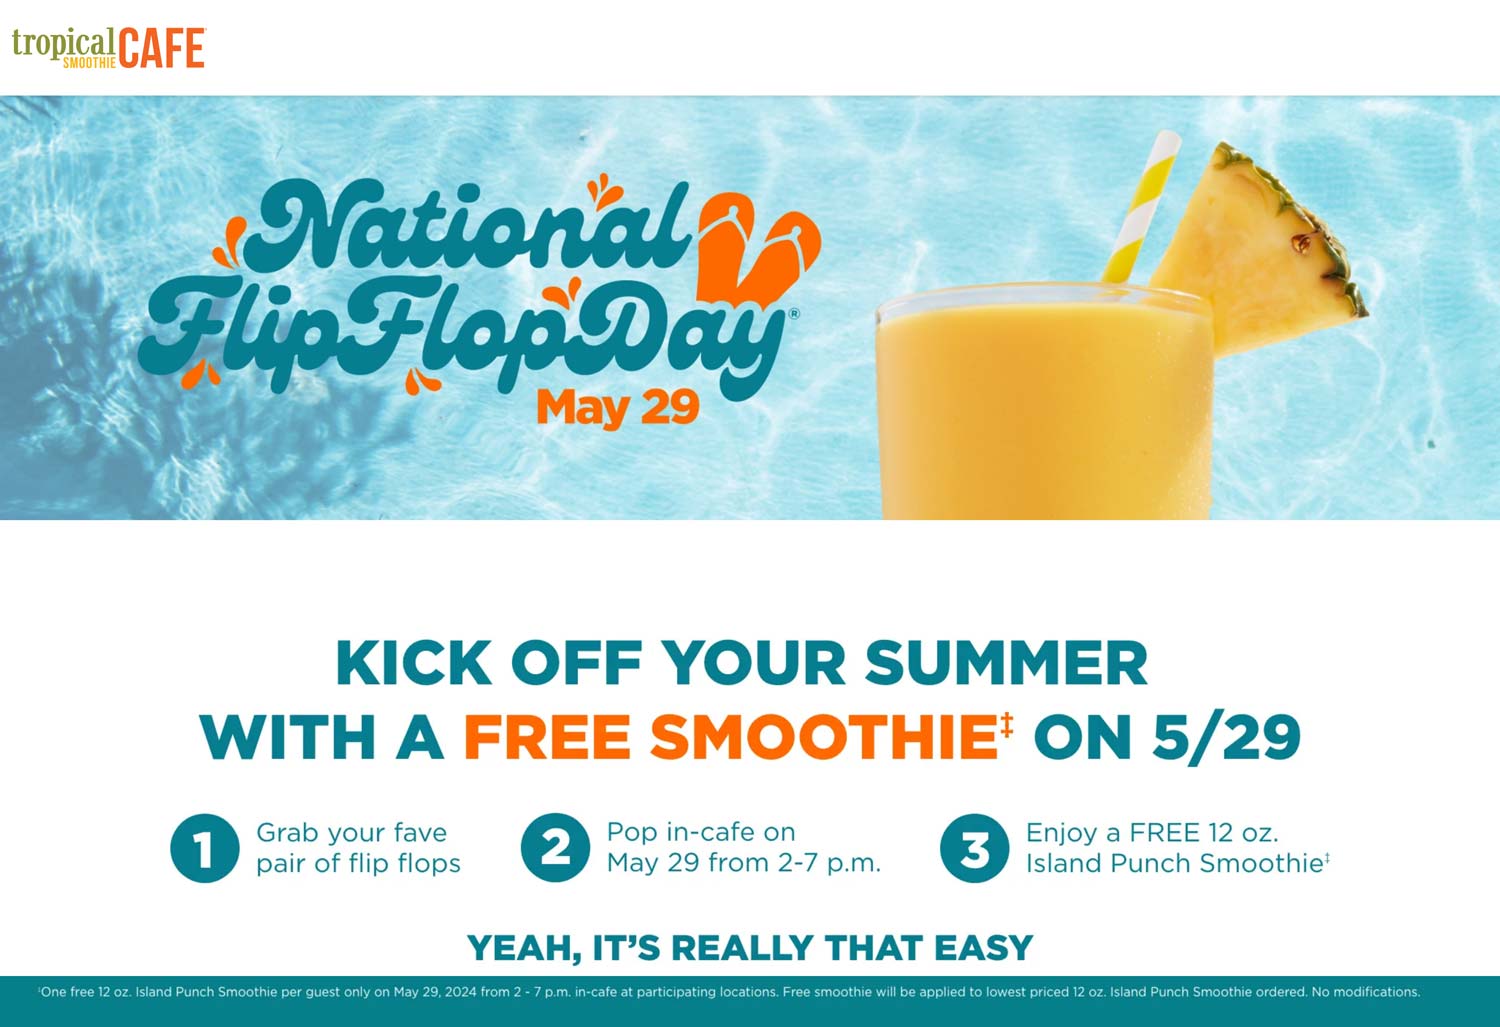 Tropical Smoothie Cafe restaurants Coupon  Free smoothie the 29th wearing flip flops at Tropical Smoothie Cafe #tropicalsmoothiecafe 